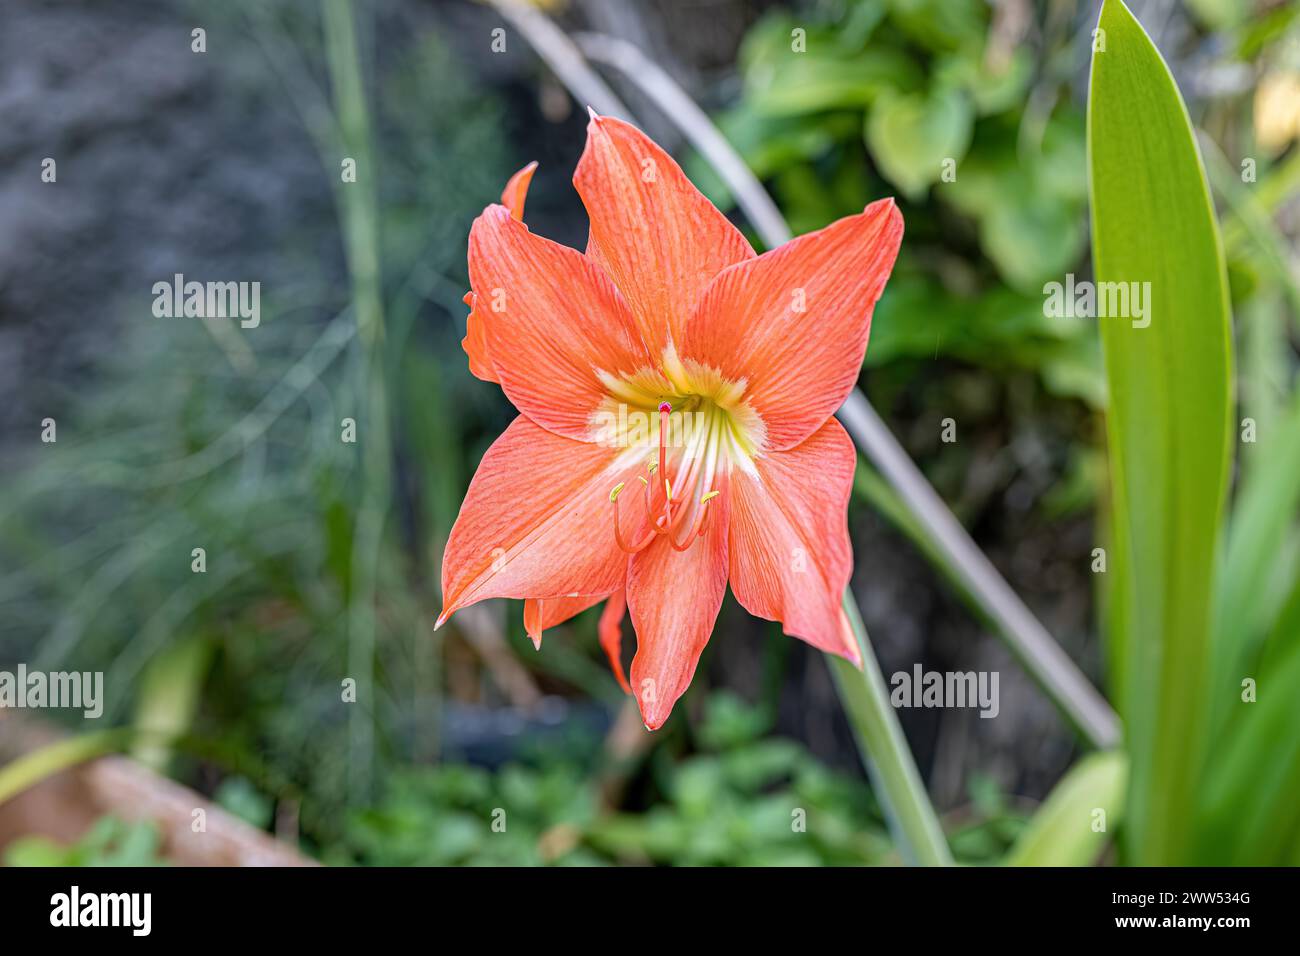 Barbados Lily Flower of the species Hippeastrum puniceum Stock Photo